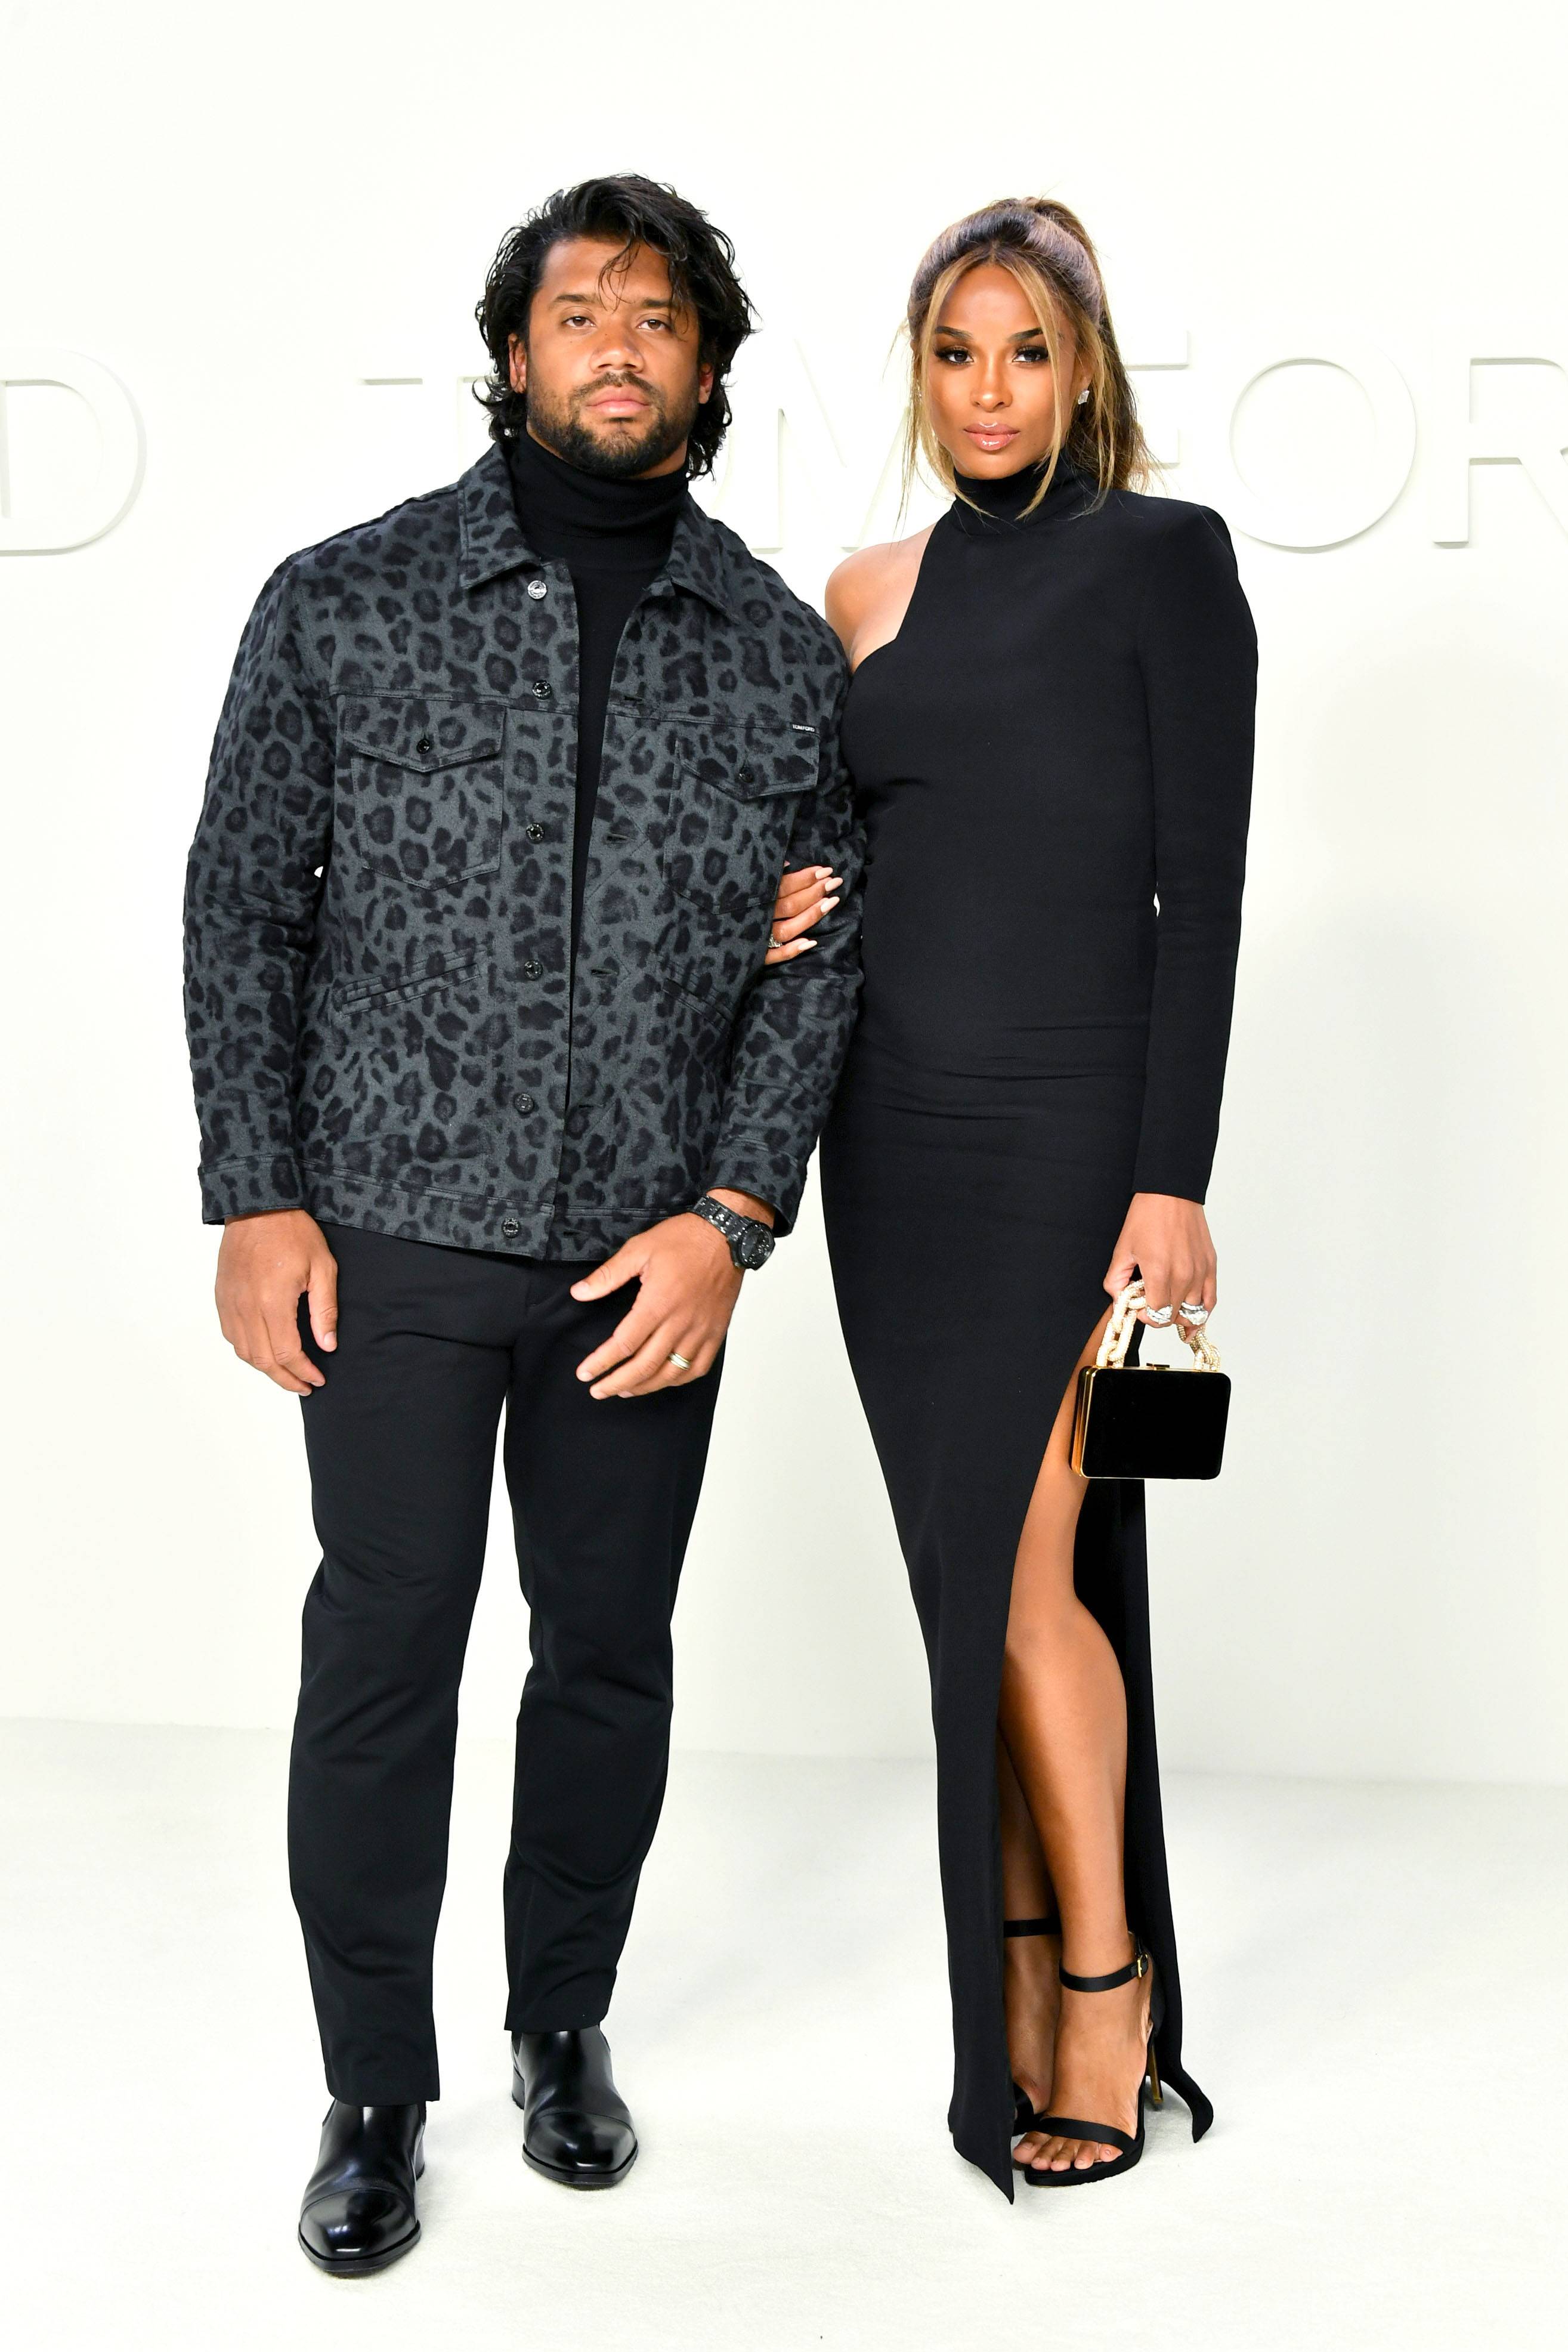 HOLLYWOOD, CALIFORNIA - FEBRUARY 07: (L-R) Russell Wilson and Ciara attend the Tom Ford AW20 Show at Milk Studios on February 07, 2020 in Hollywood, California. (Photo by Amy Sussman/Getty Images)